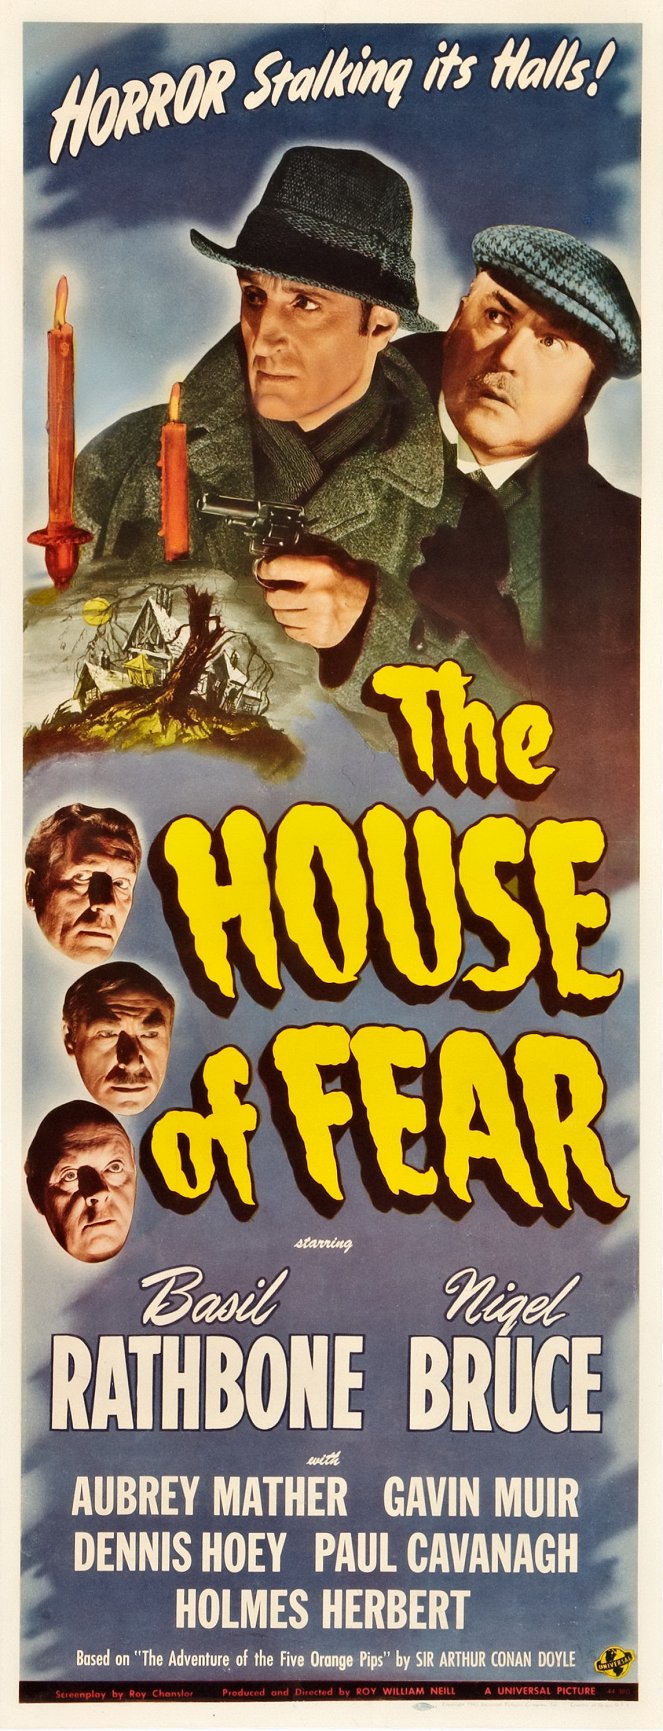 The House of Fear - Cartazes